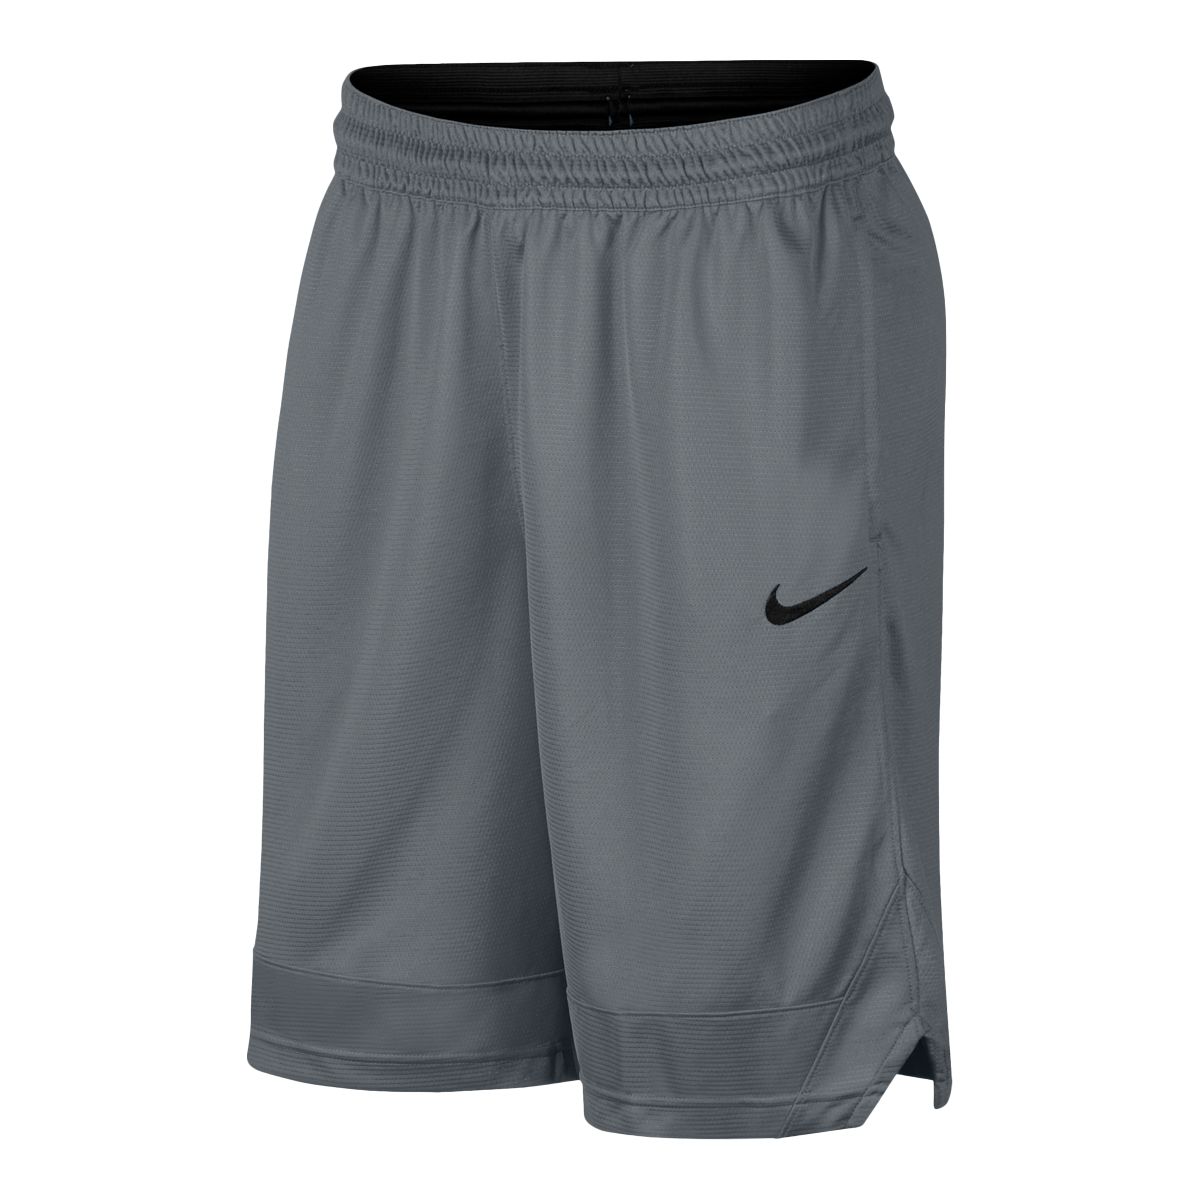 Under Armour Men's Baseline 10-in Shorts